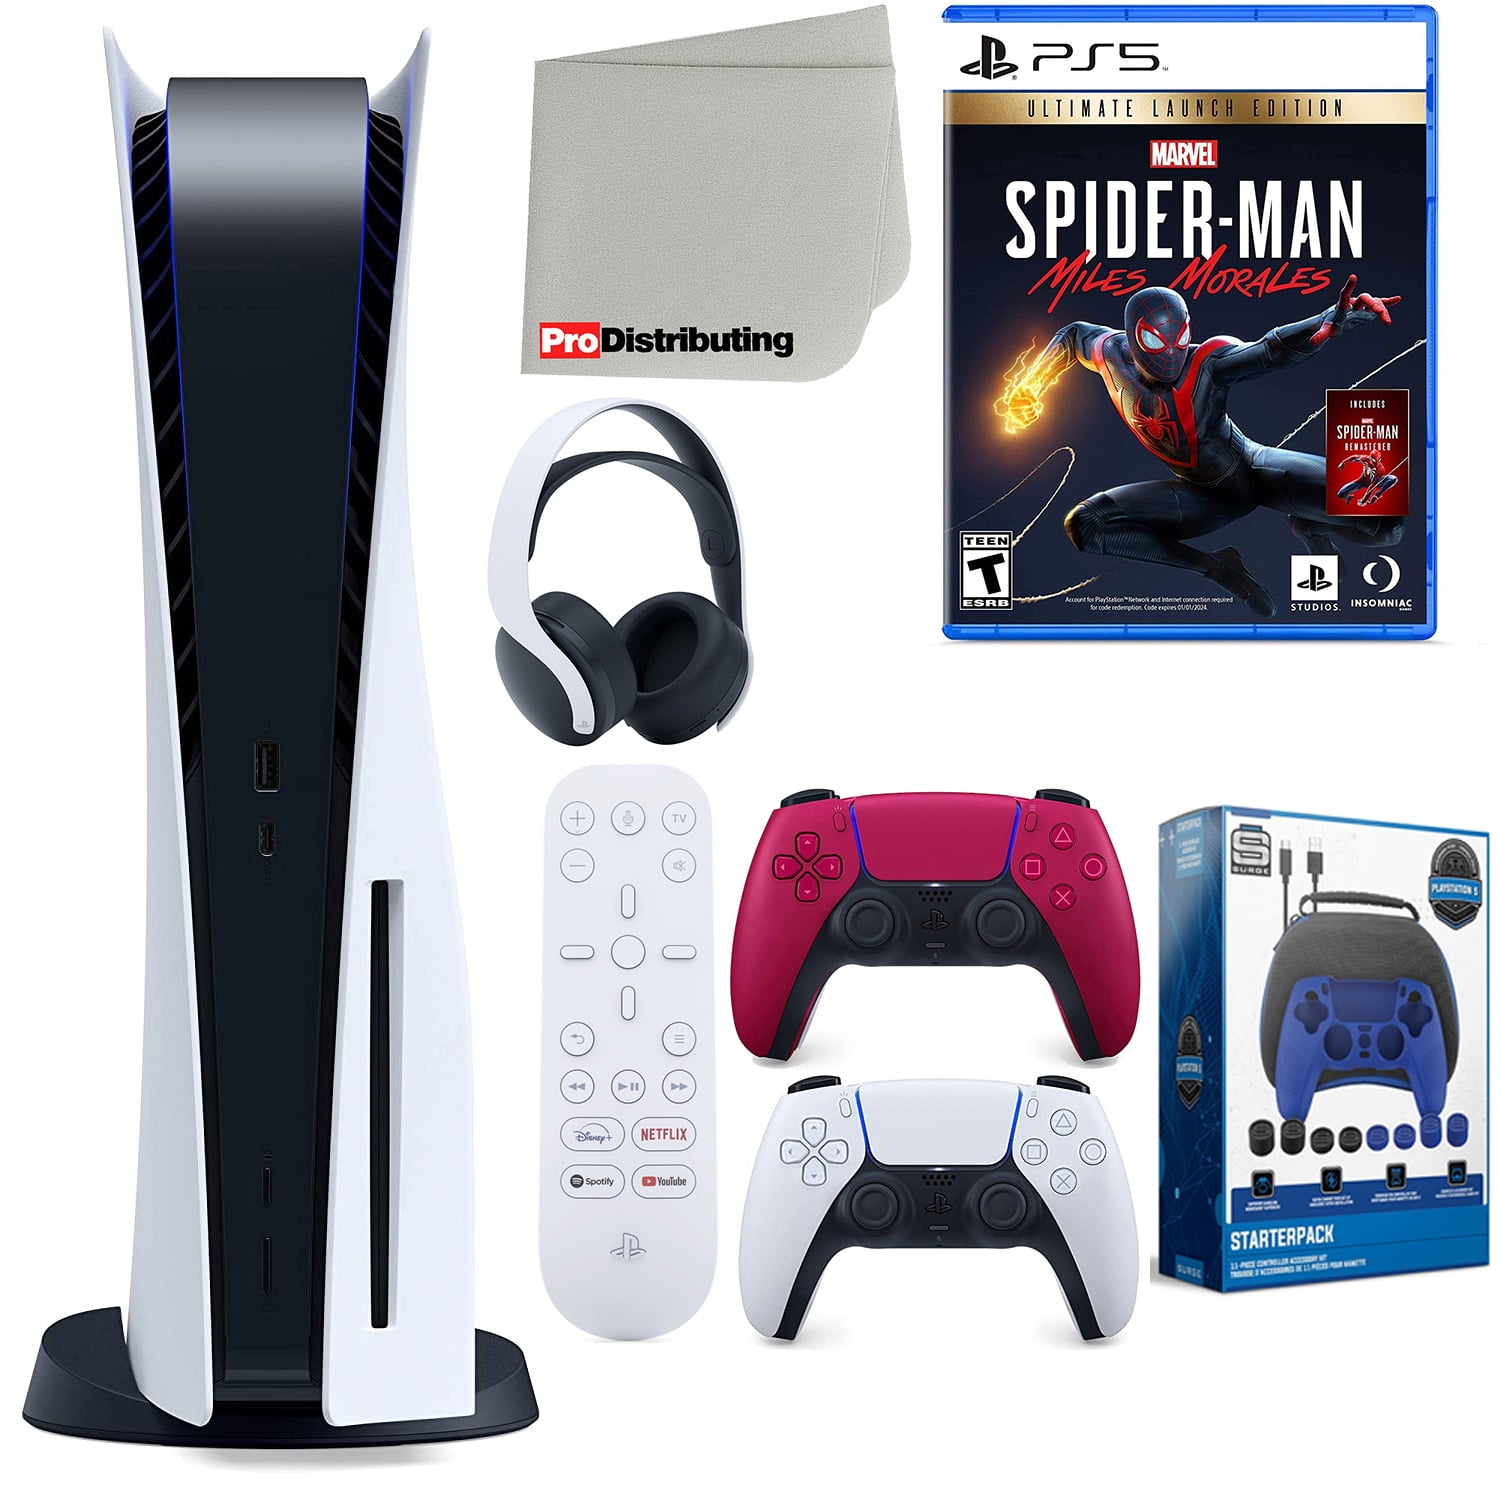 Sony Playstation 5 Disc Version (Sony PS5 Disc) with Cosmic Red Extra  Controller, Headset, Media Remote, Spider-Man: Miles Morales Ultimate  Launch 